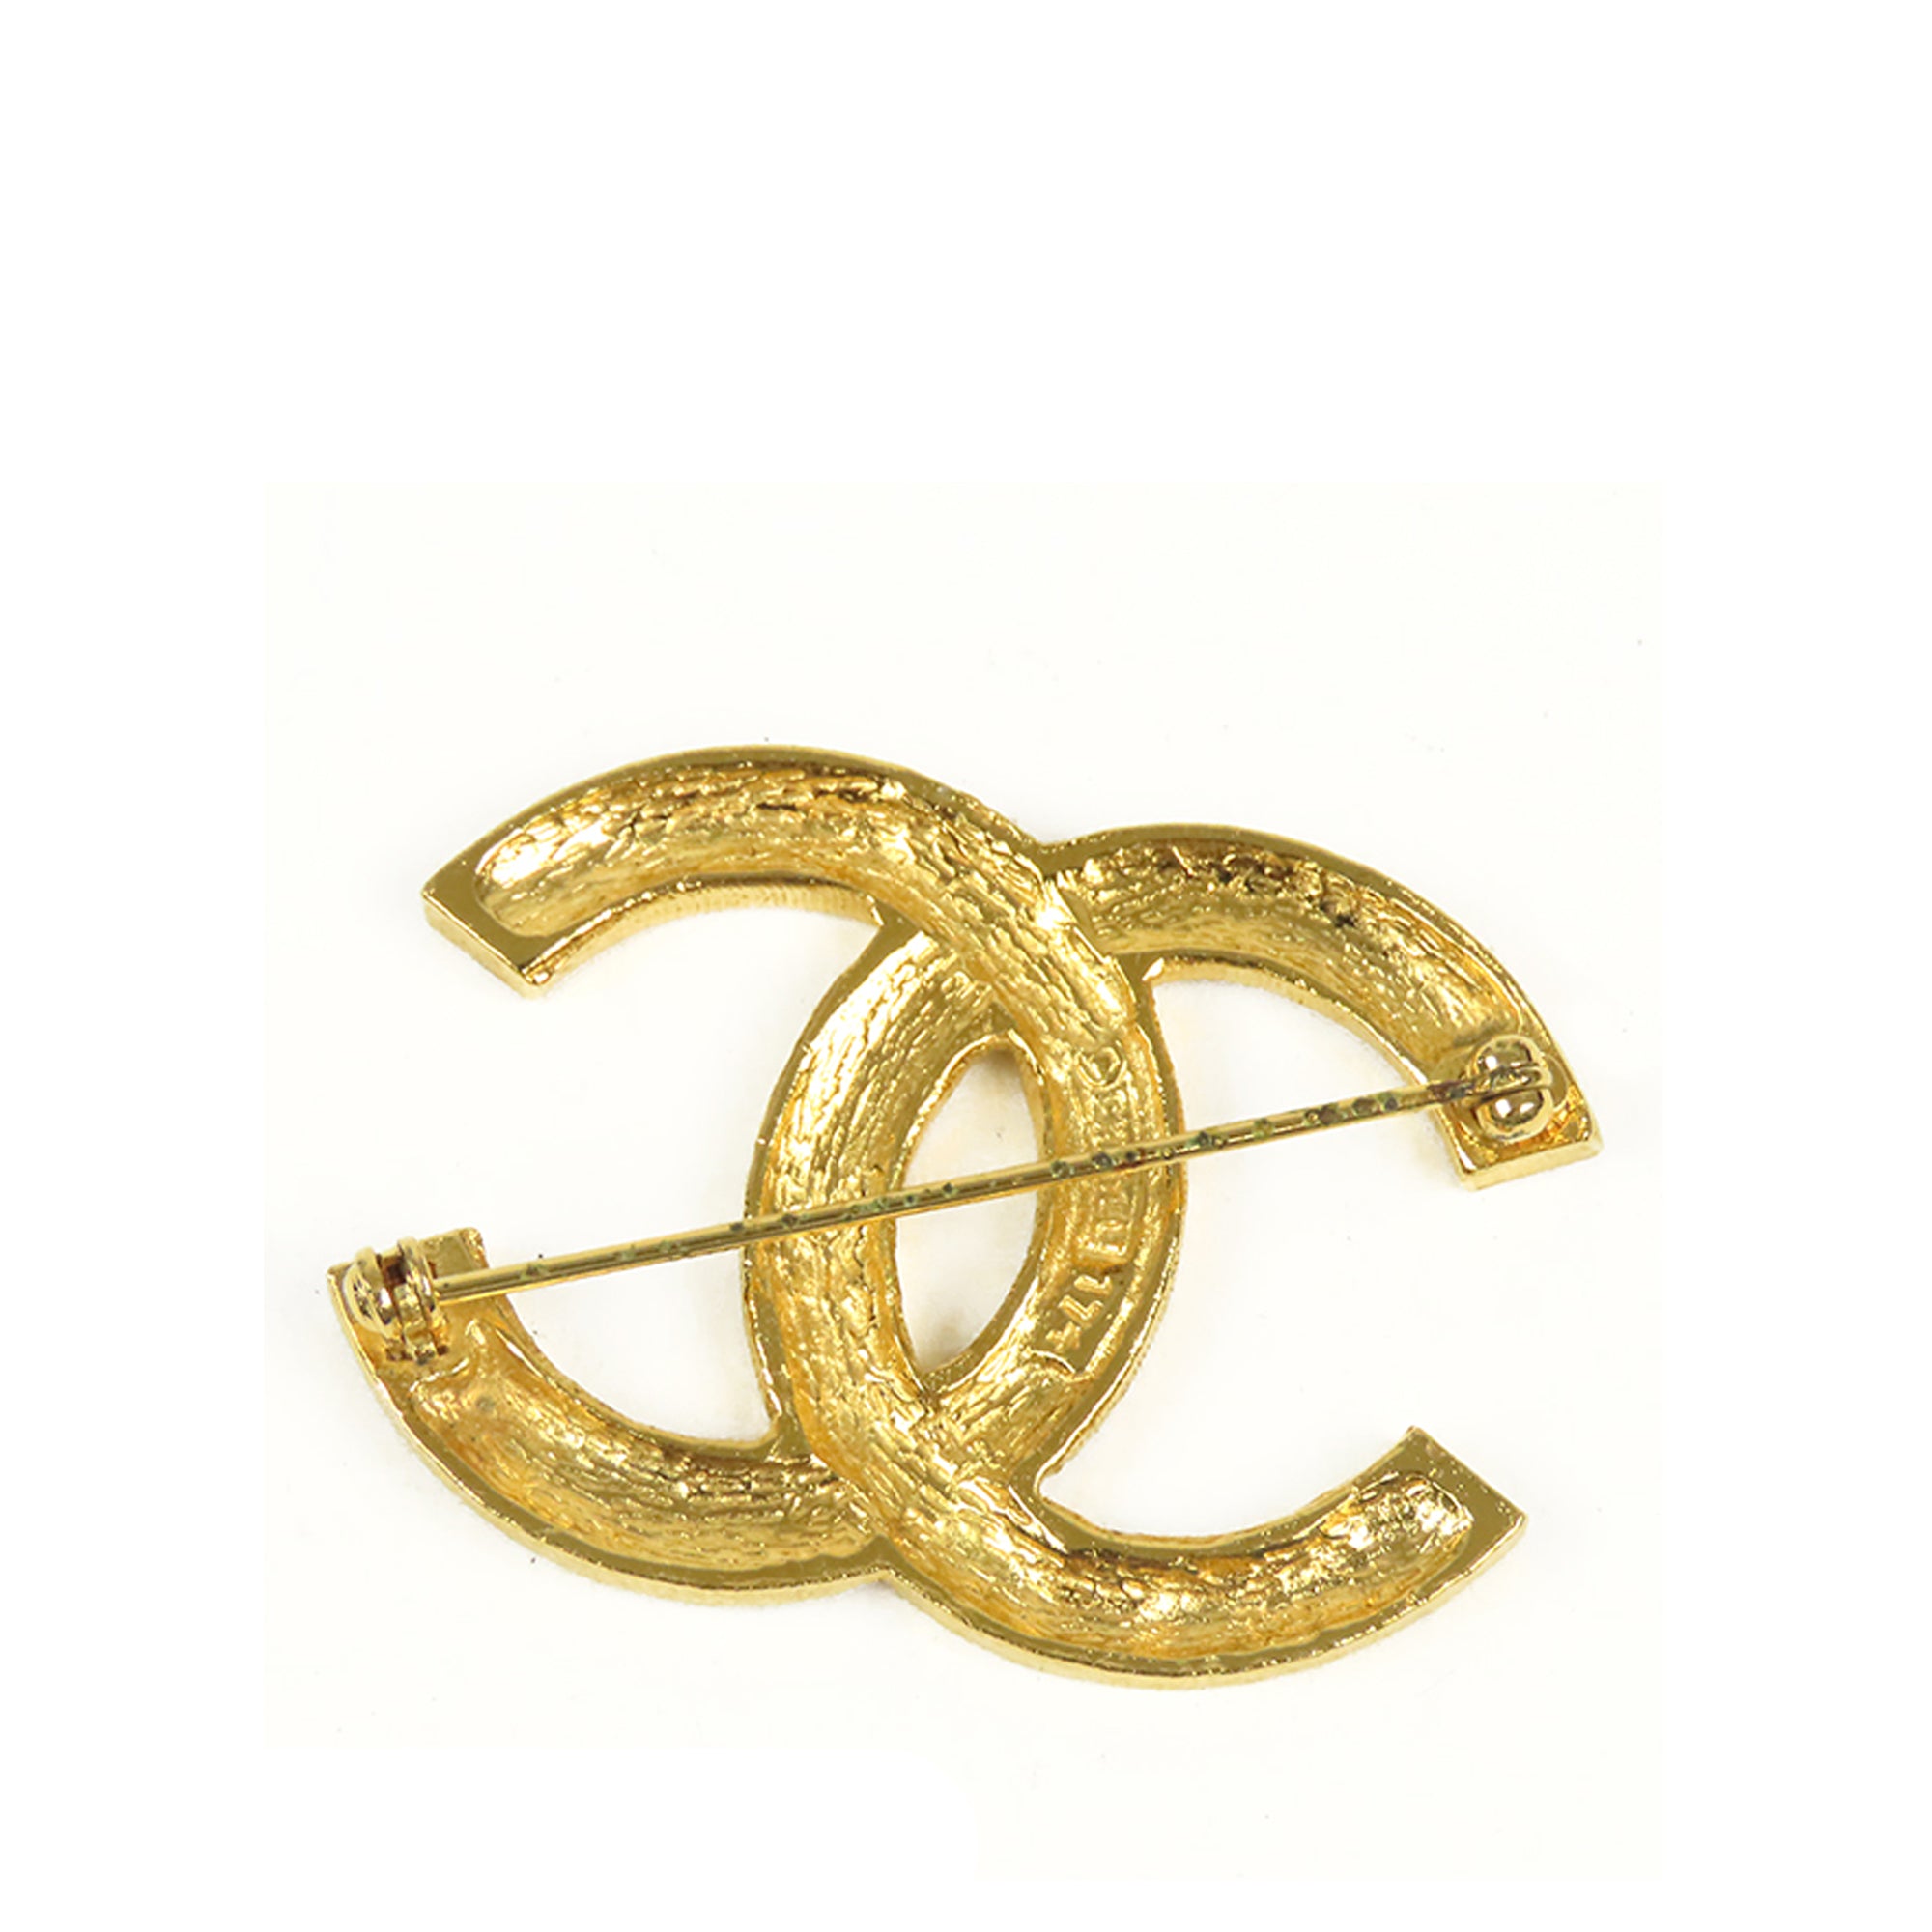 Gold Chanel CC Quilted Brooch – Designer Revival